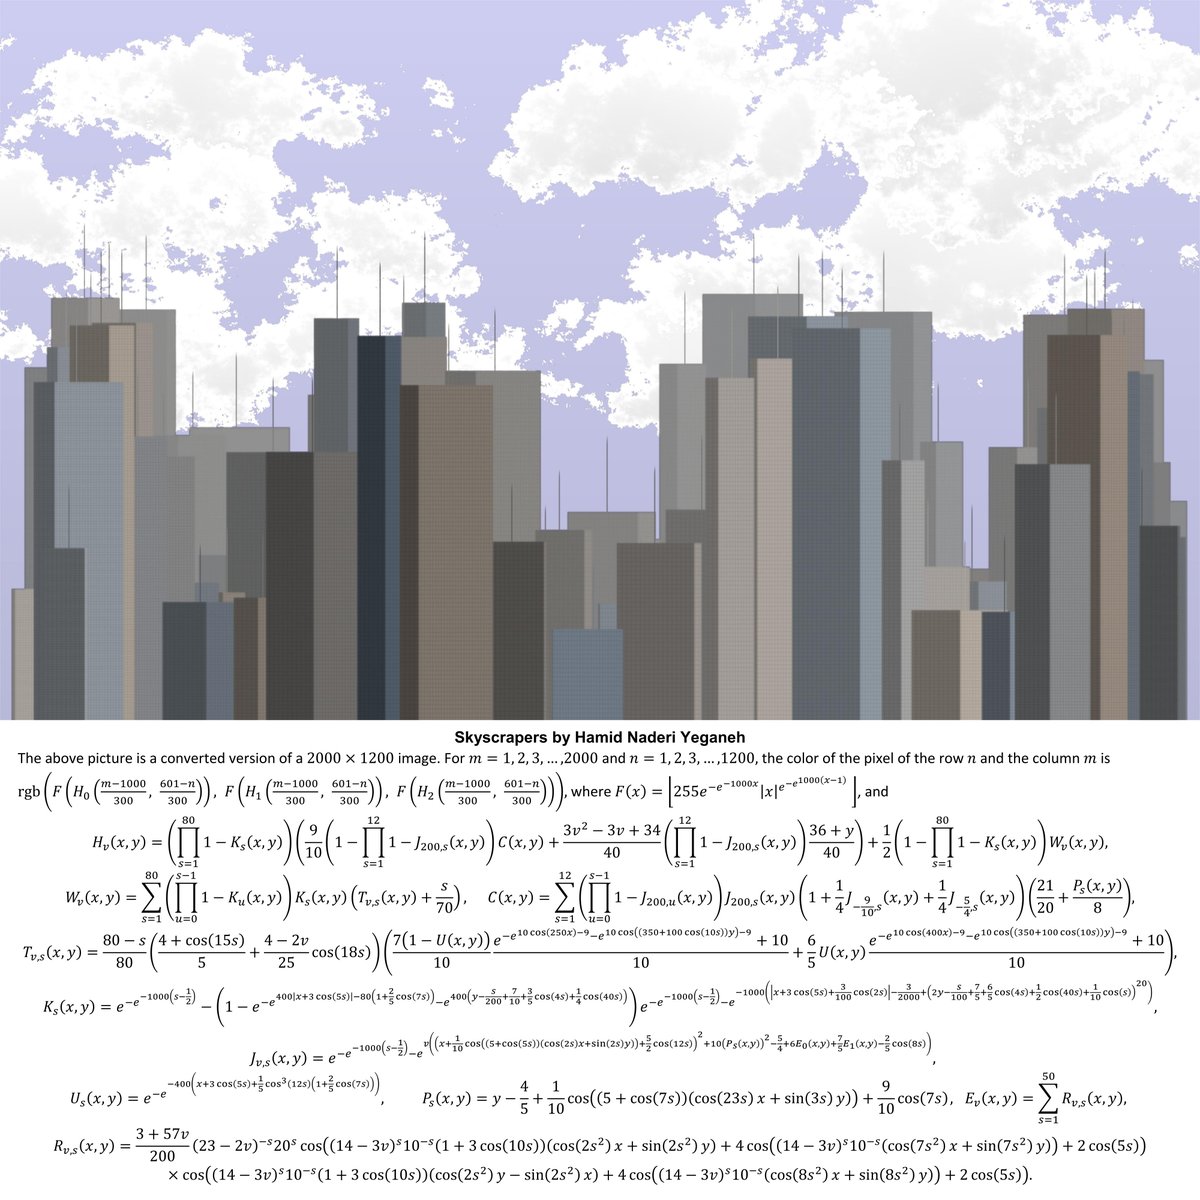 I drew this view of skyscrapers with mathematical equations.